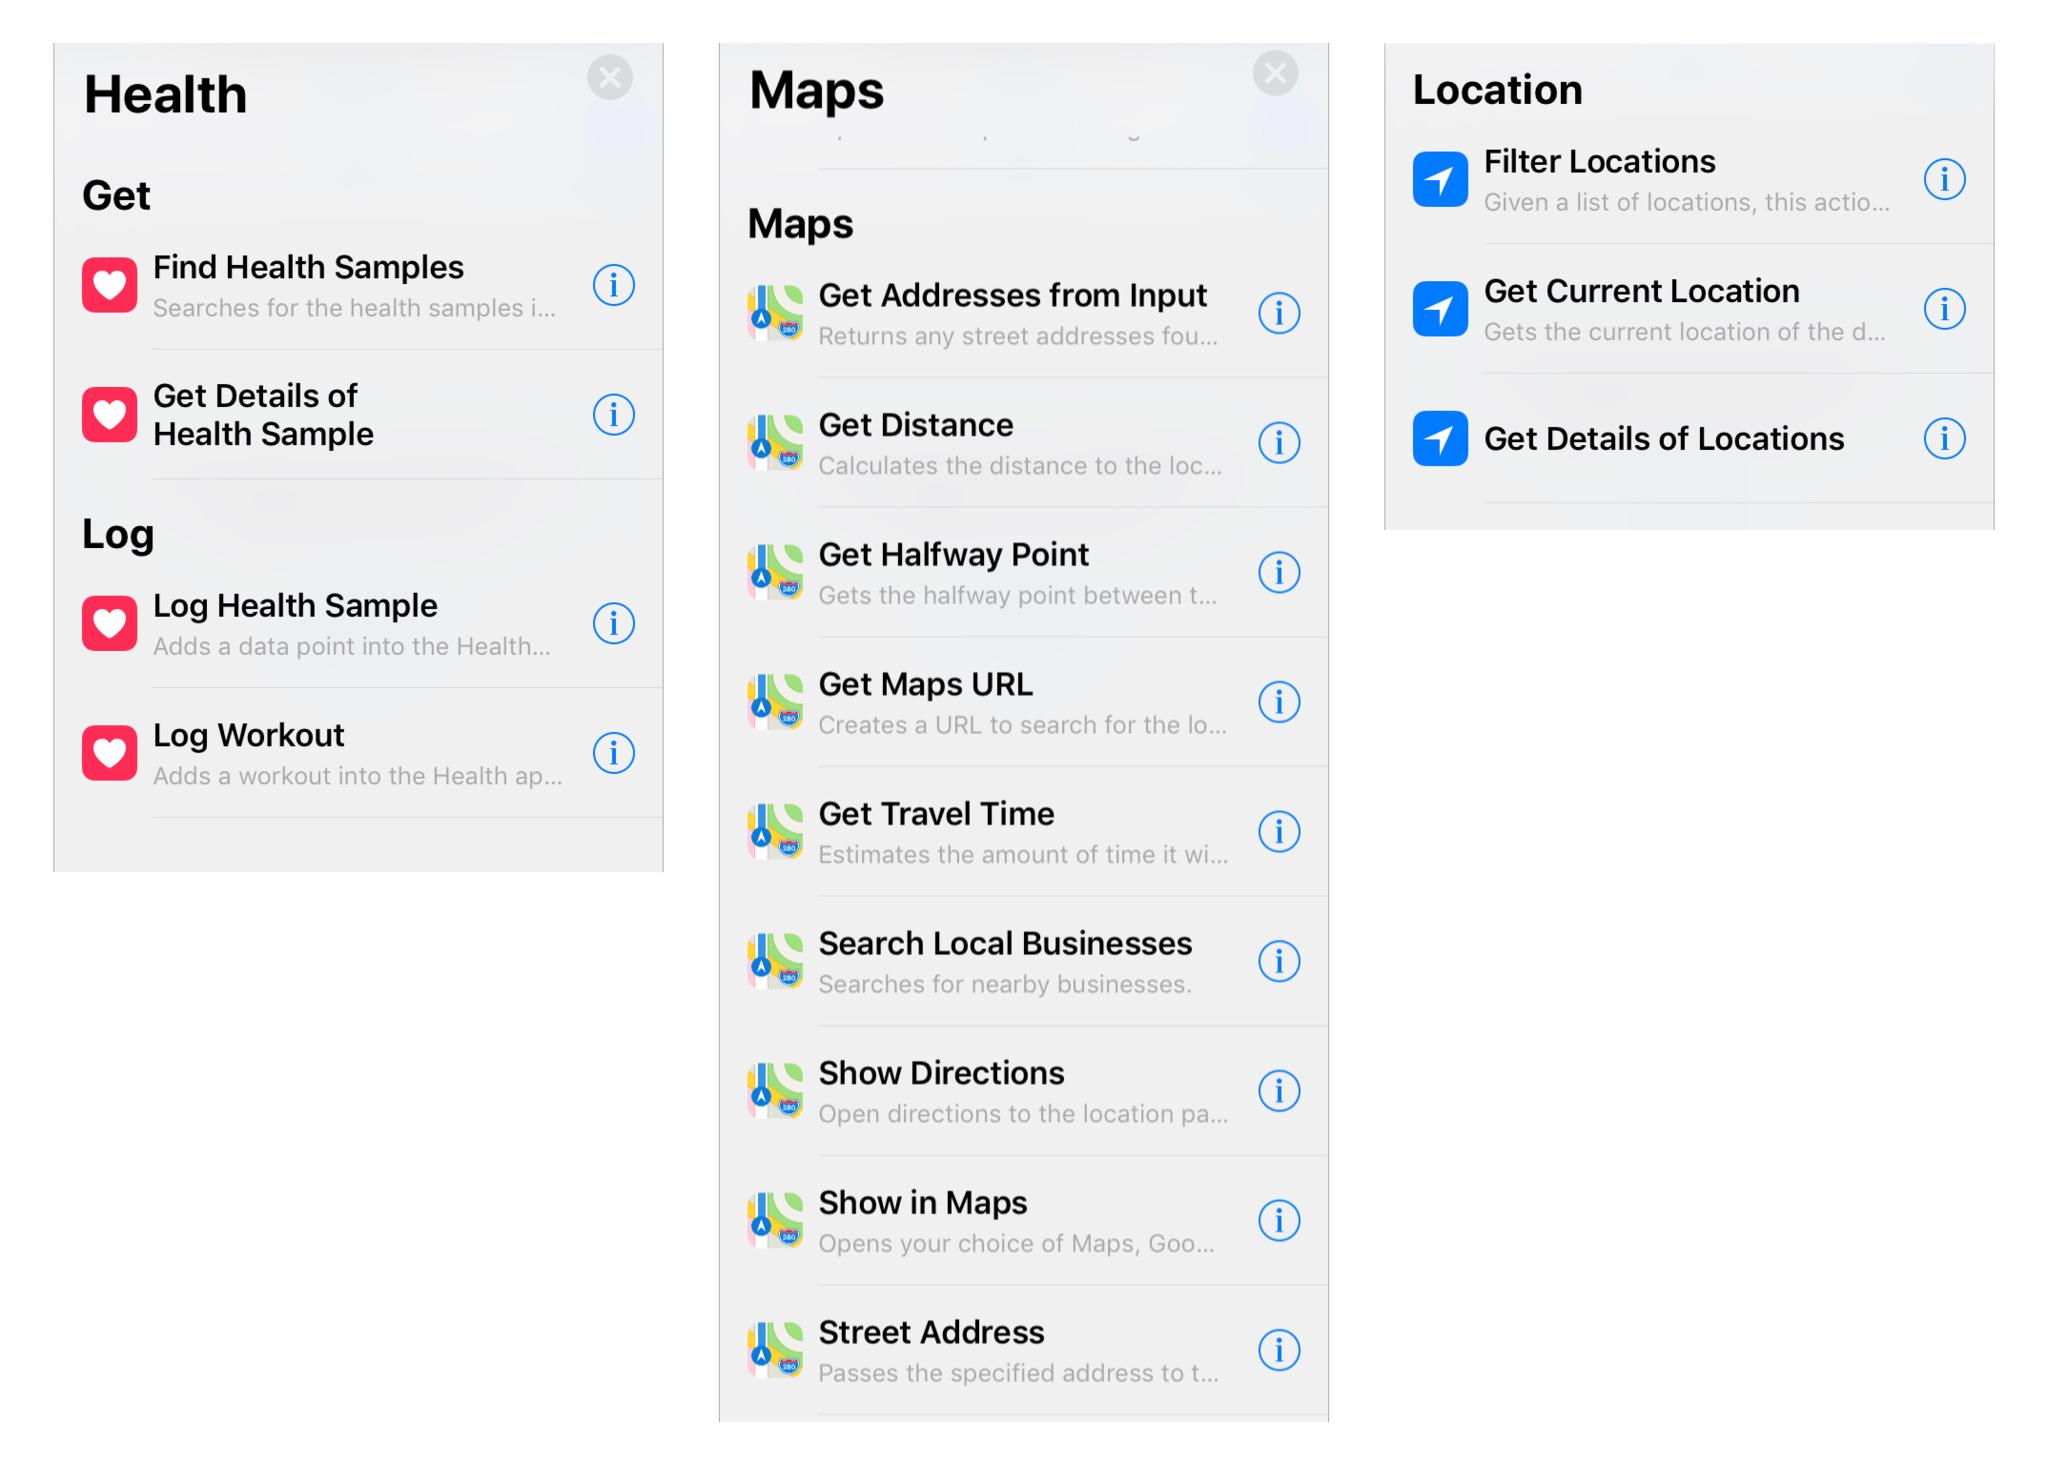 Image showing clipped screenshots of Shortcuts actions, including the Health, Maps, and Location categories